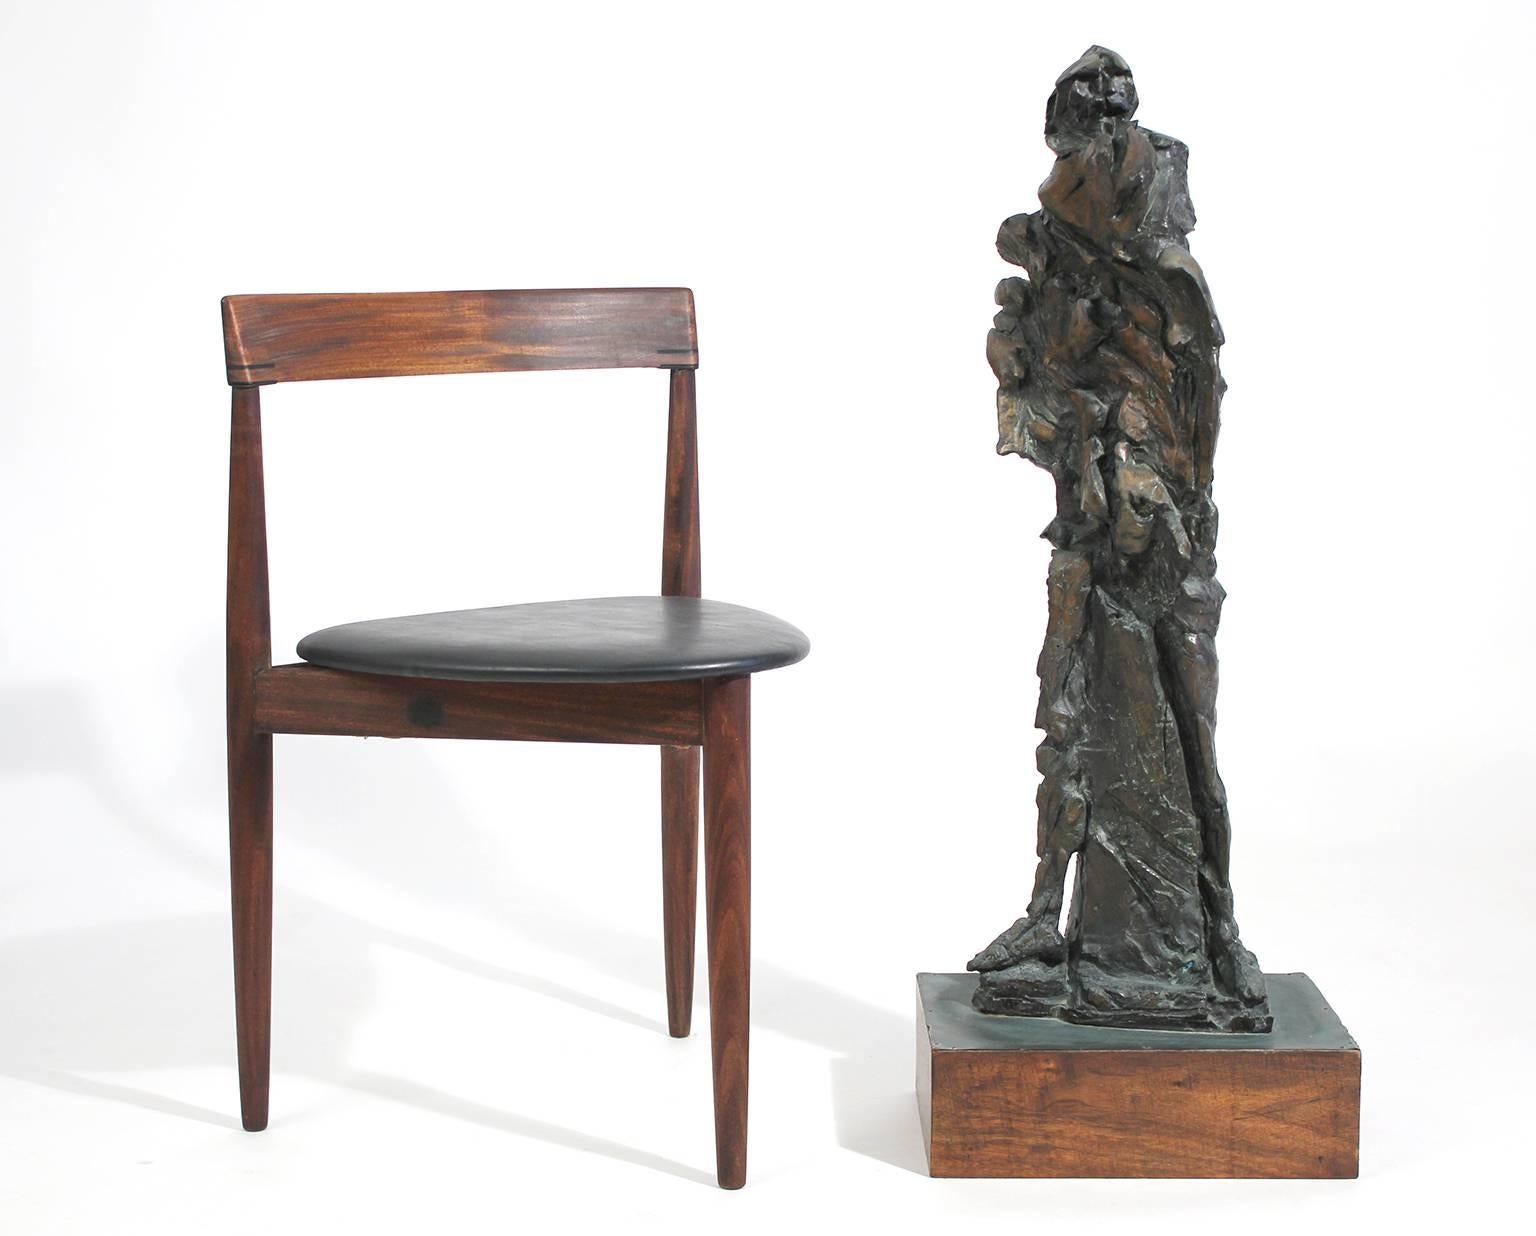 Large and very well executed cast bronze abstract Brutalist figural sculpture mounted on wood base with copper clad top. Artist unknown, circa 1960s.